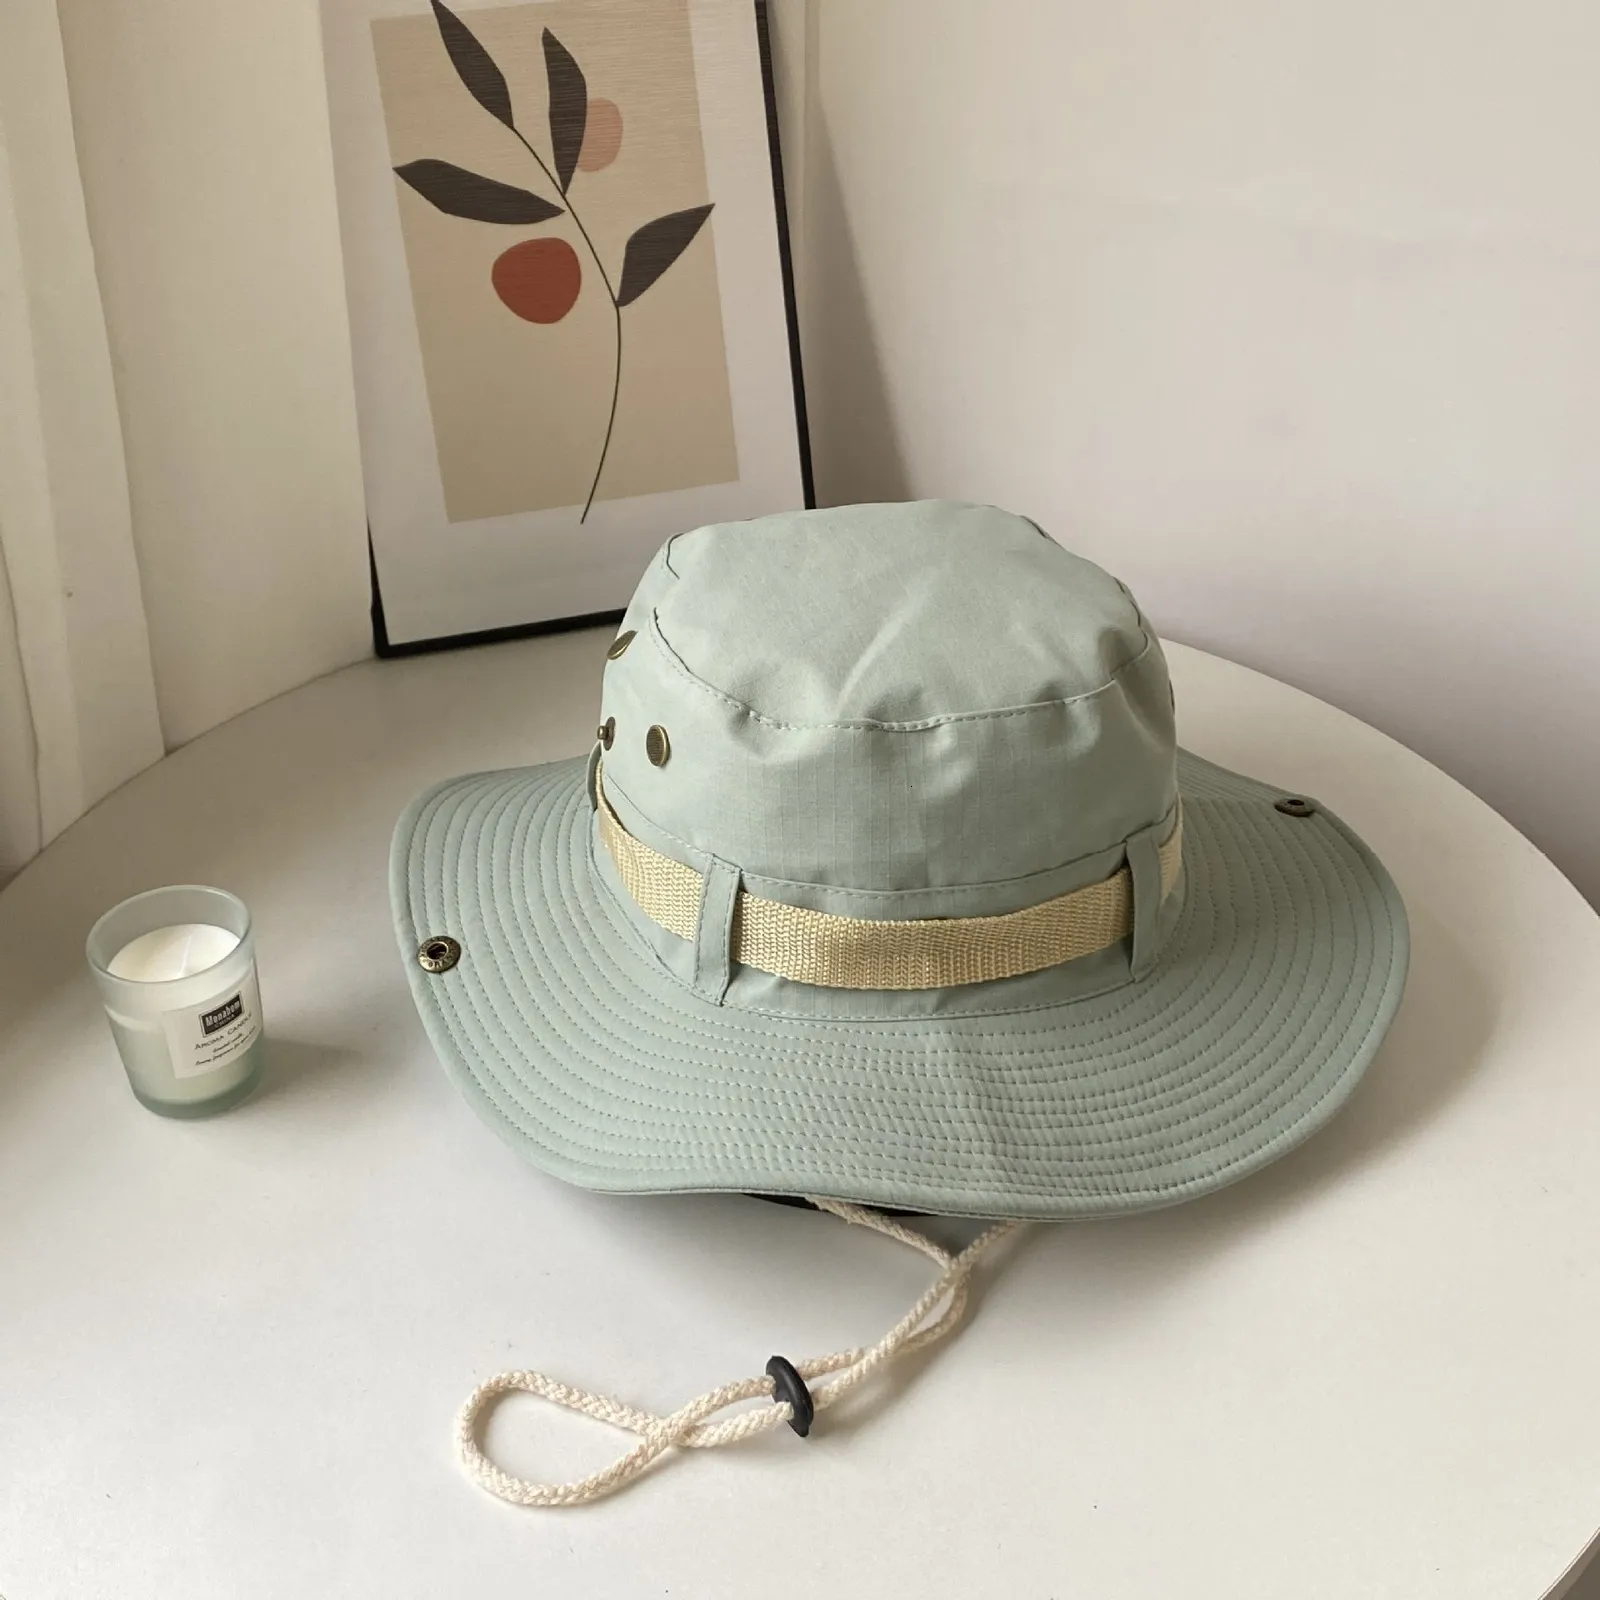 Japanese Style Wide Brim Sustainable Bucket Hat For Outdoor Activities  Hiking, Fishing, Camping, Climbing Sun Protection With Windproof Rope For  Men And Women From Pang03, $7.17